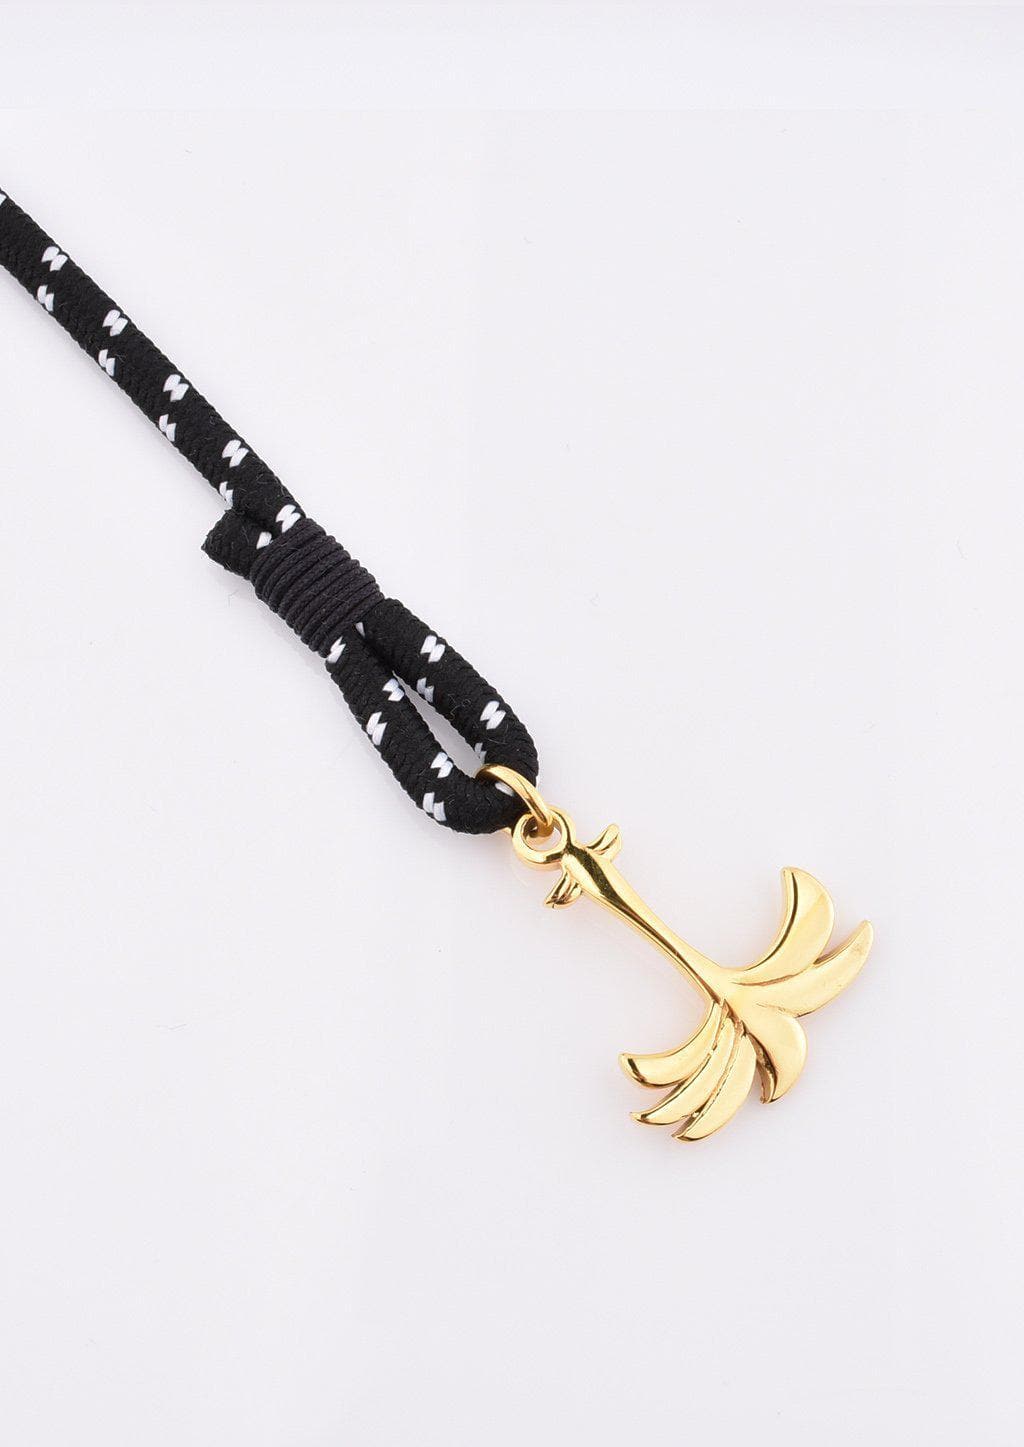 Trophy - Triple - Season two Palm anchor bracelet with black and white nylon band. Close up on palm.